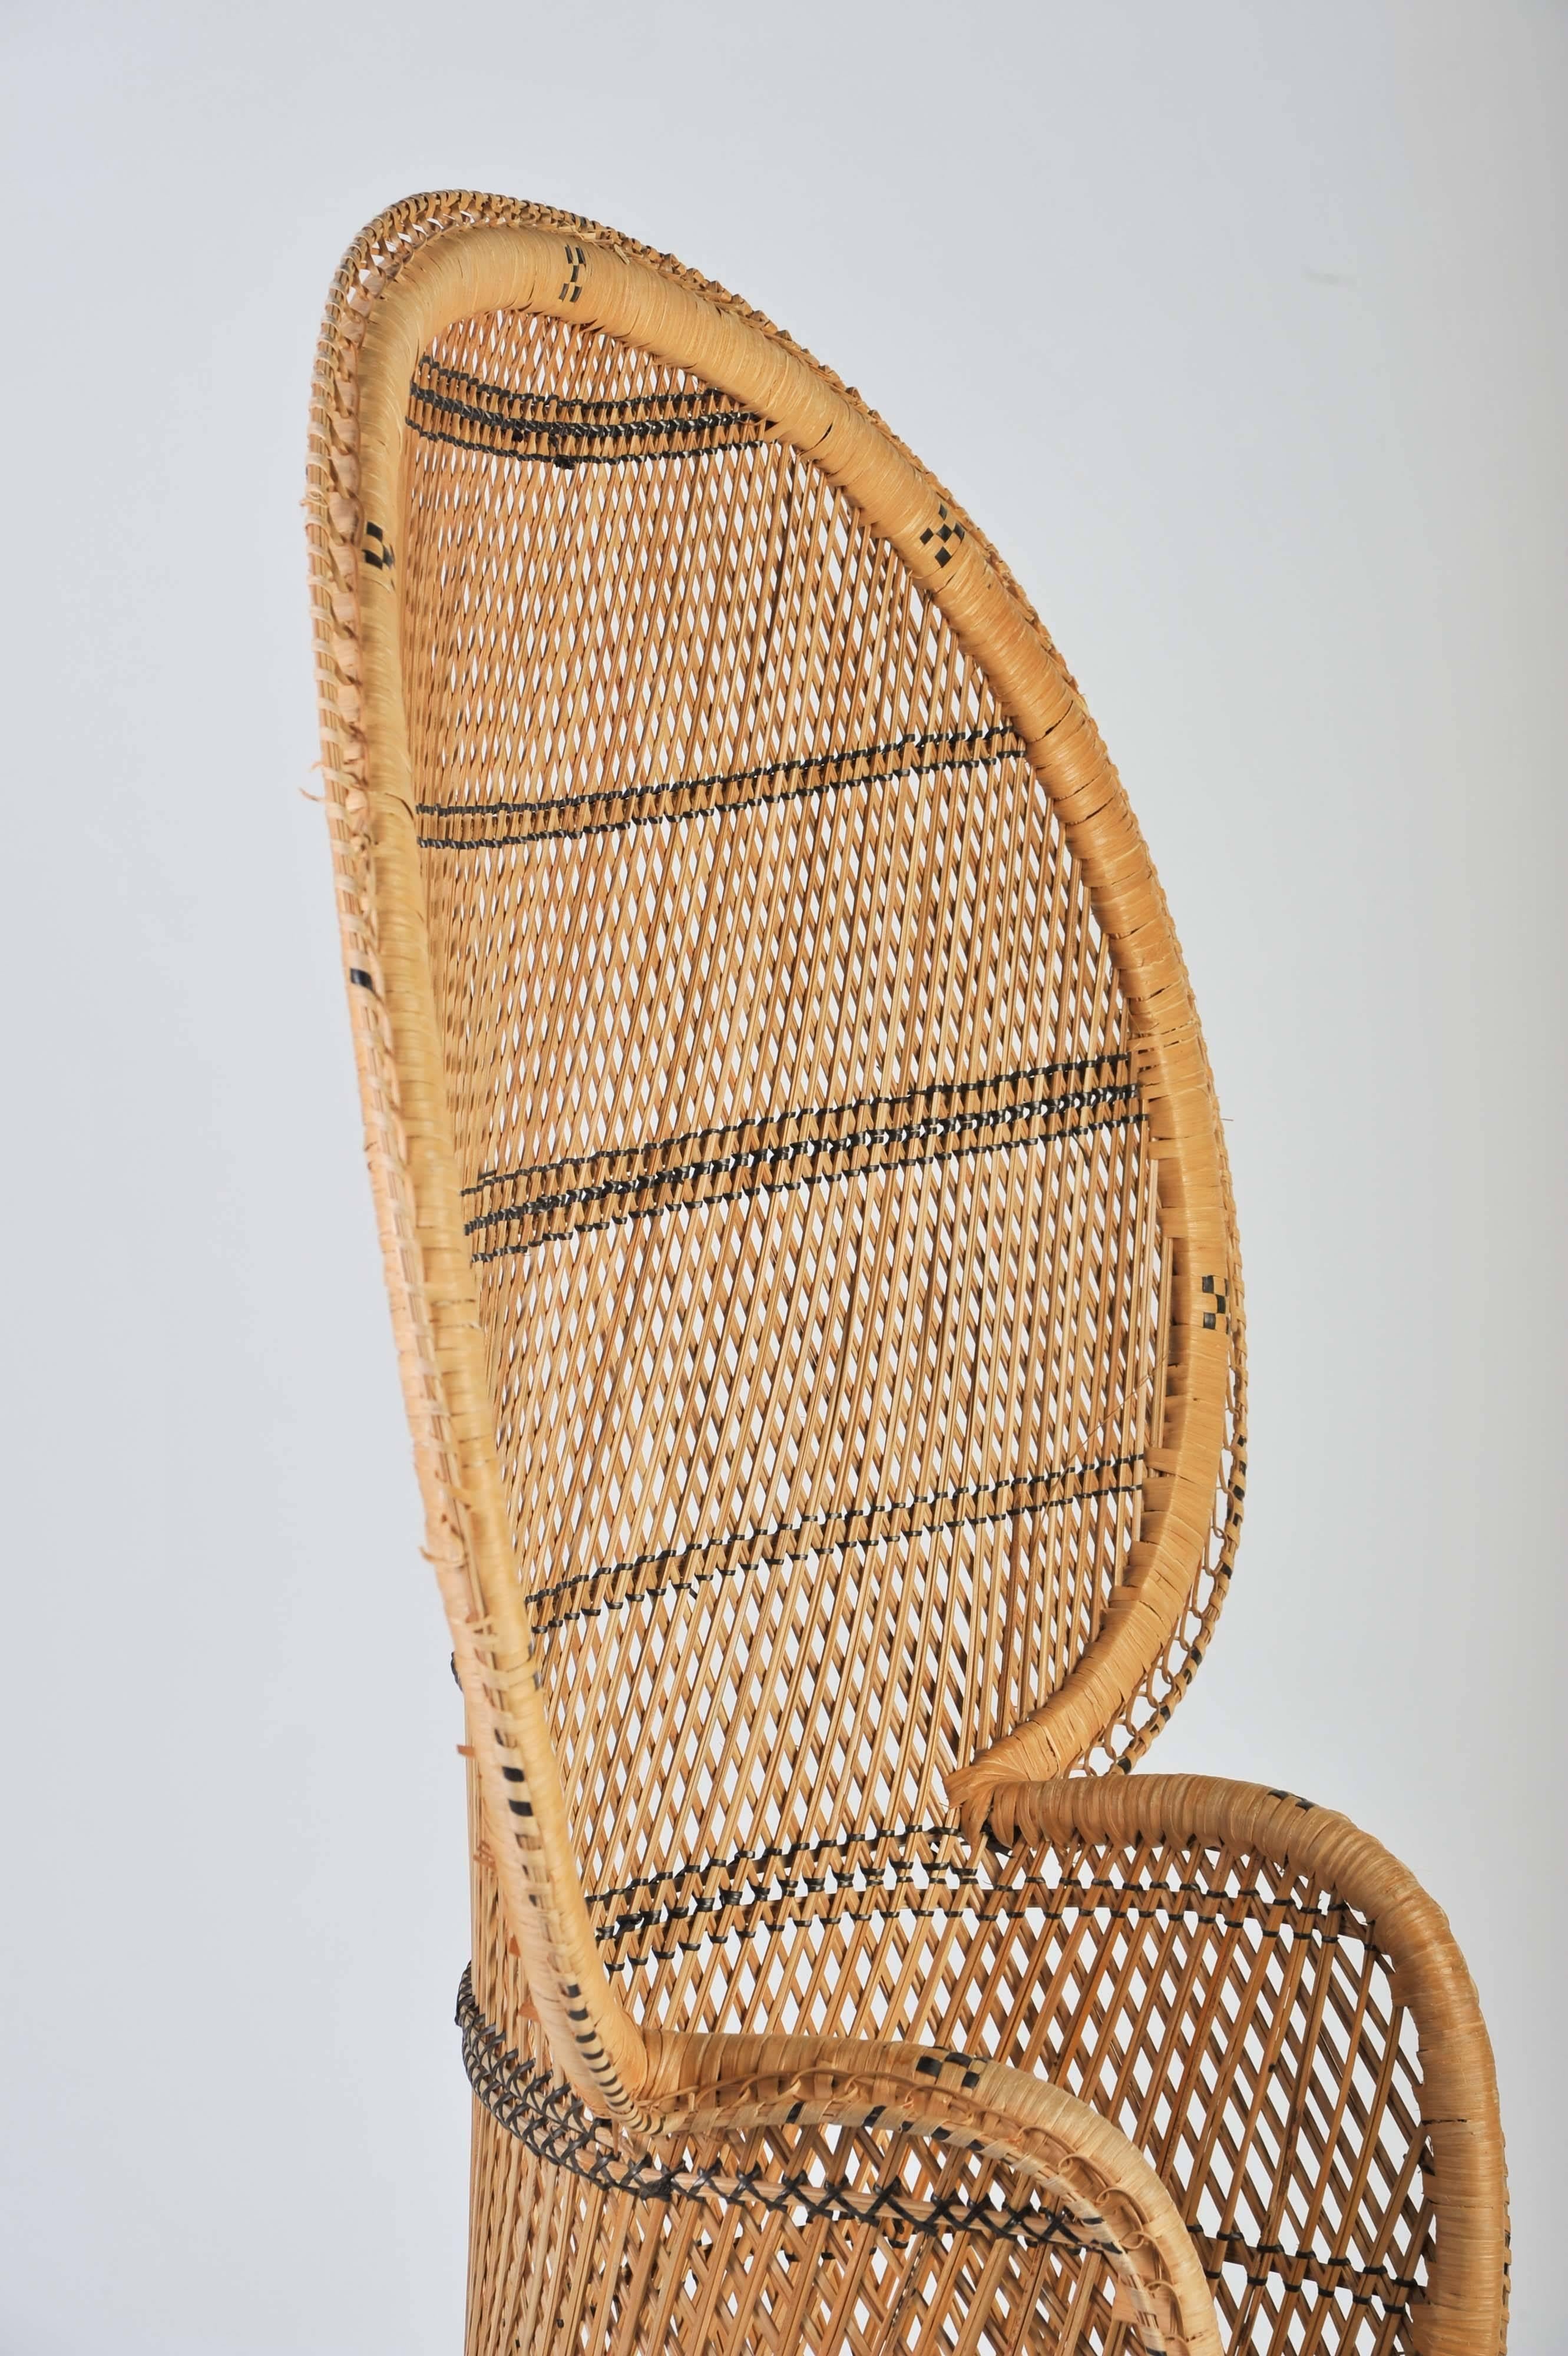 Large Vintage Bohemian 1970s Wicker Emmanuel/Peacock Chair  In Excellent Condition For Sale In London, GB